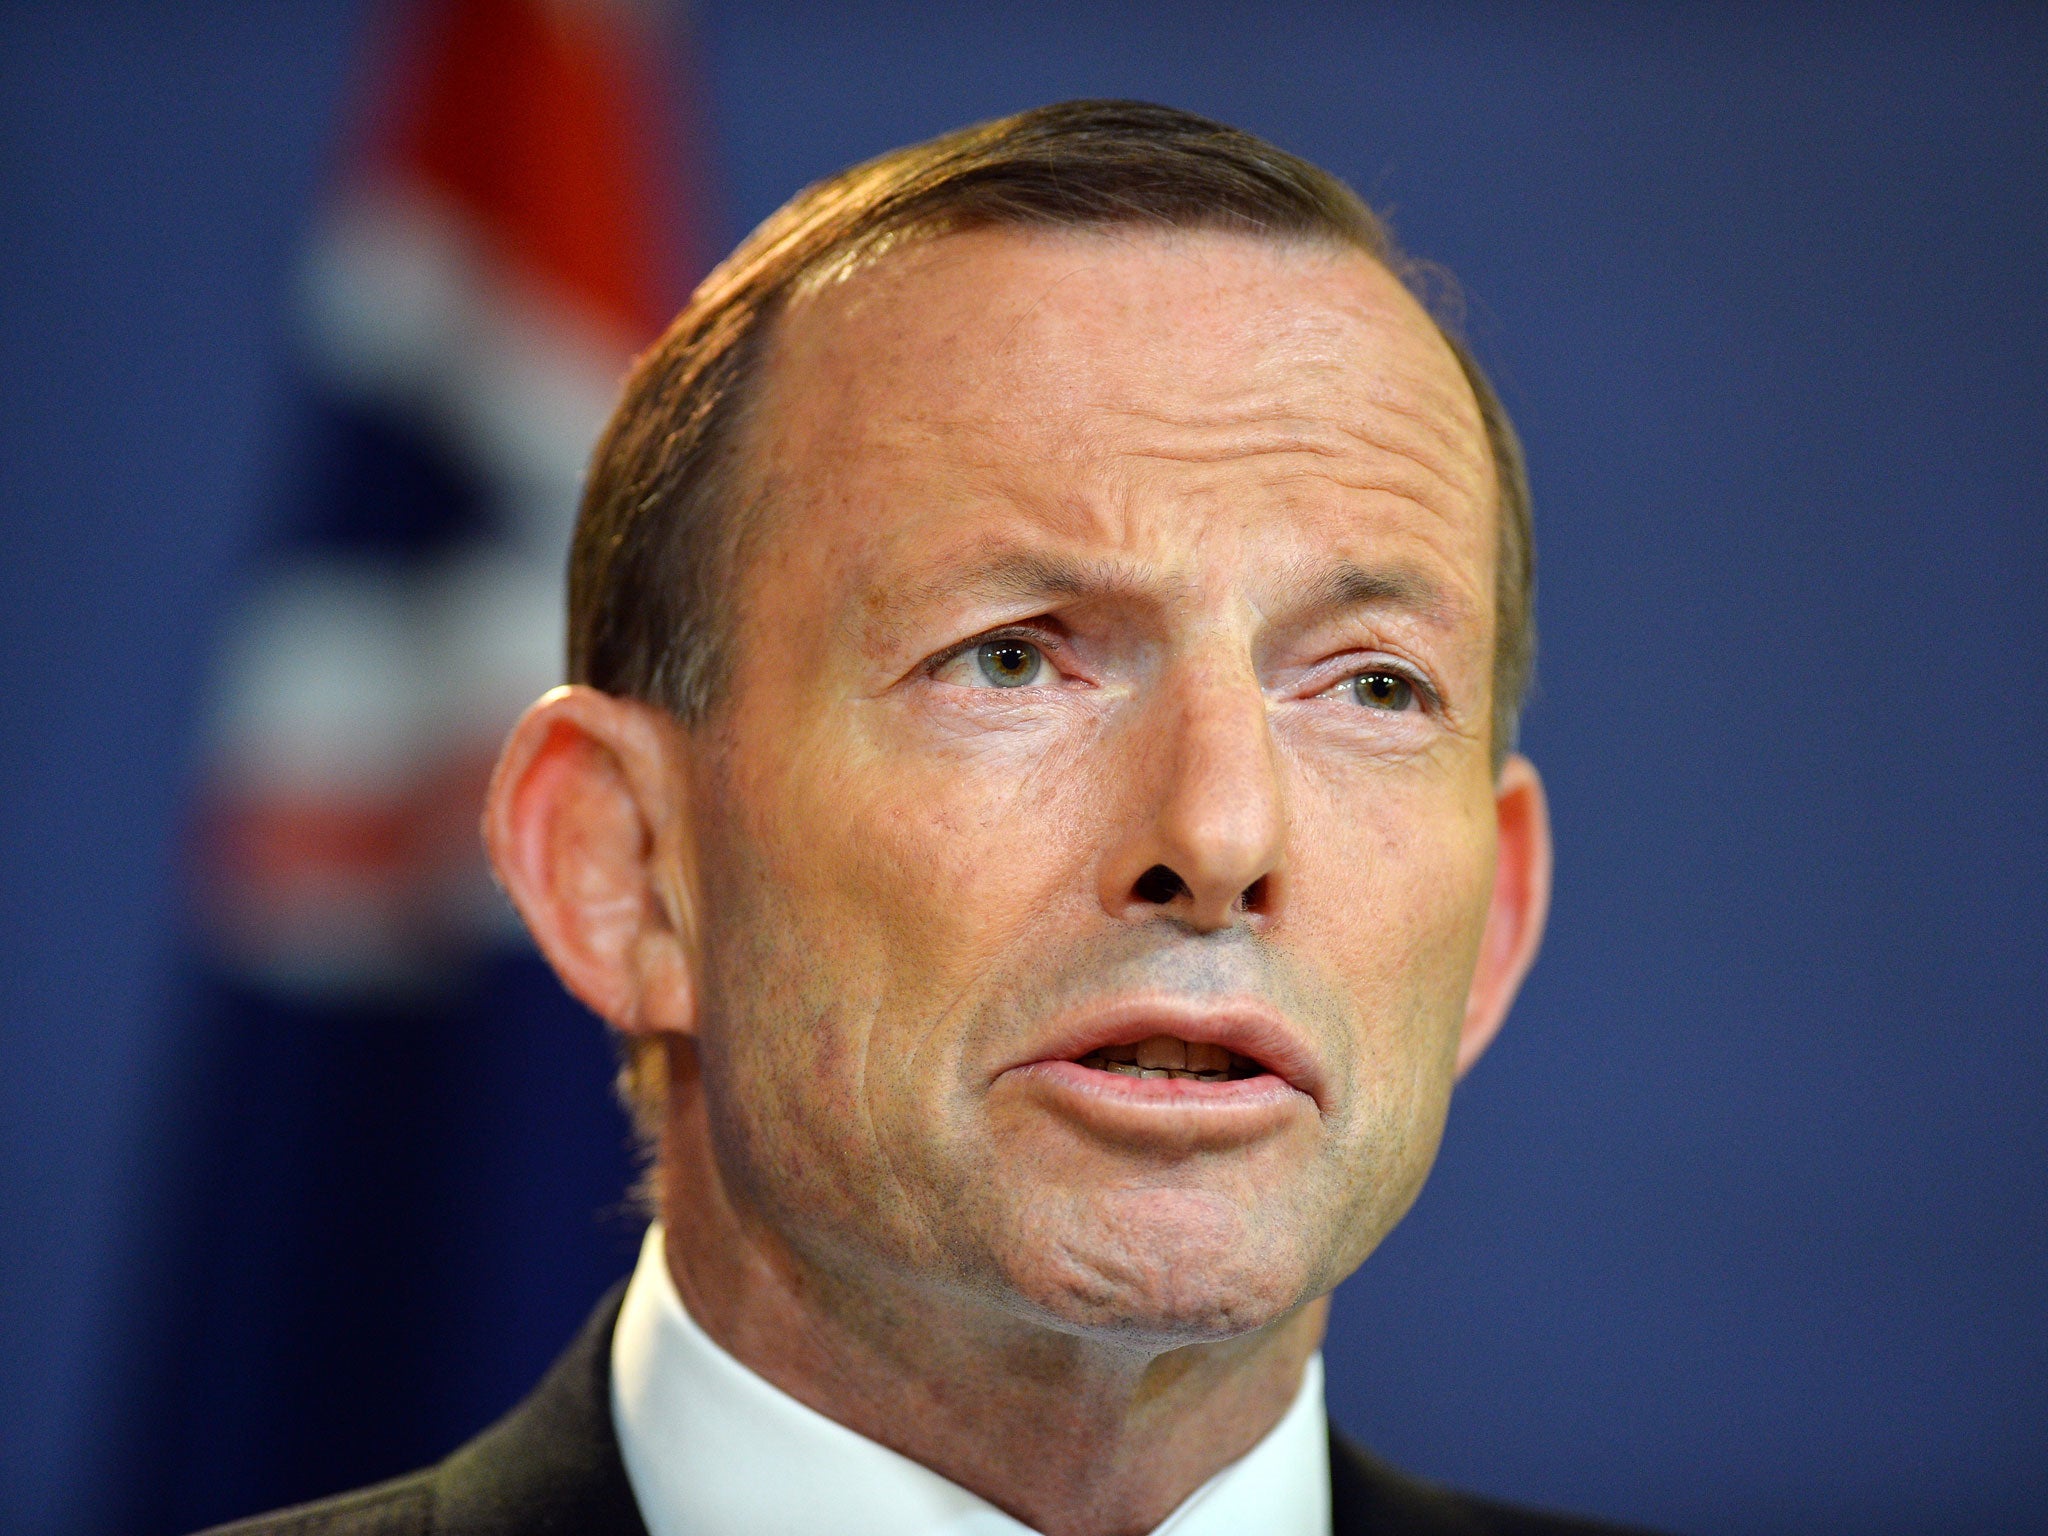 Australian PM Tony Abbott has come out against Scottish independence